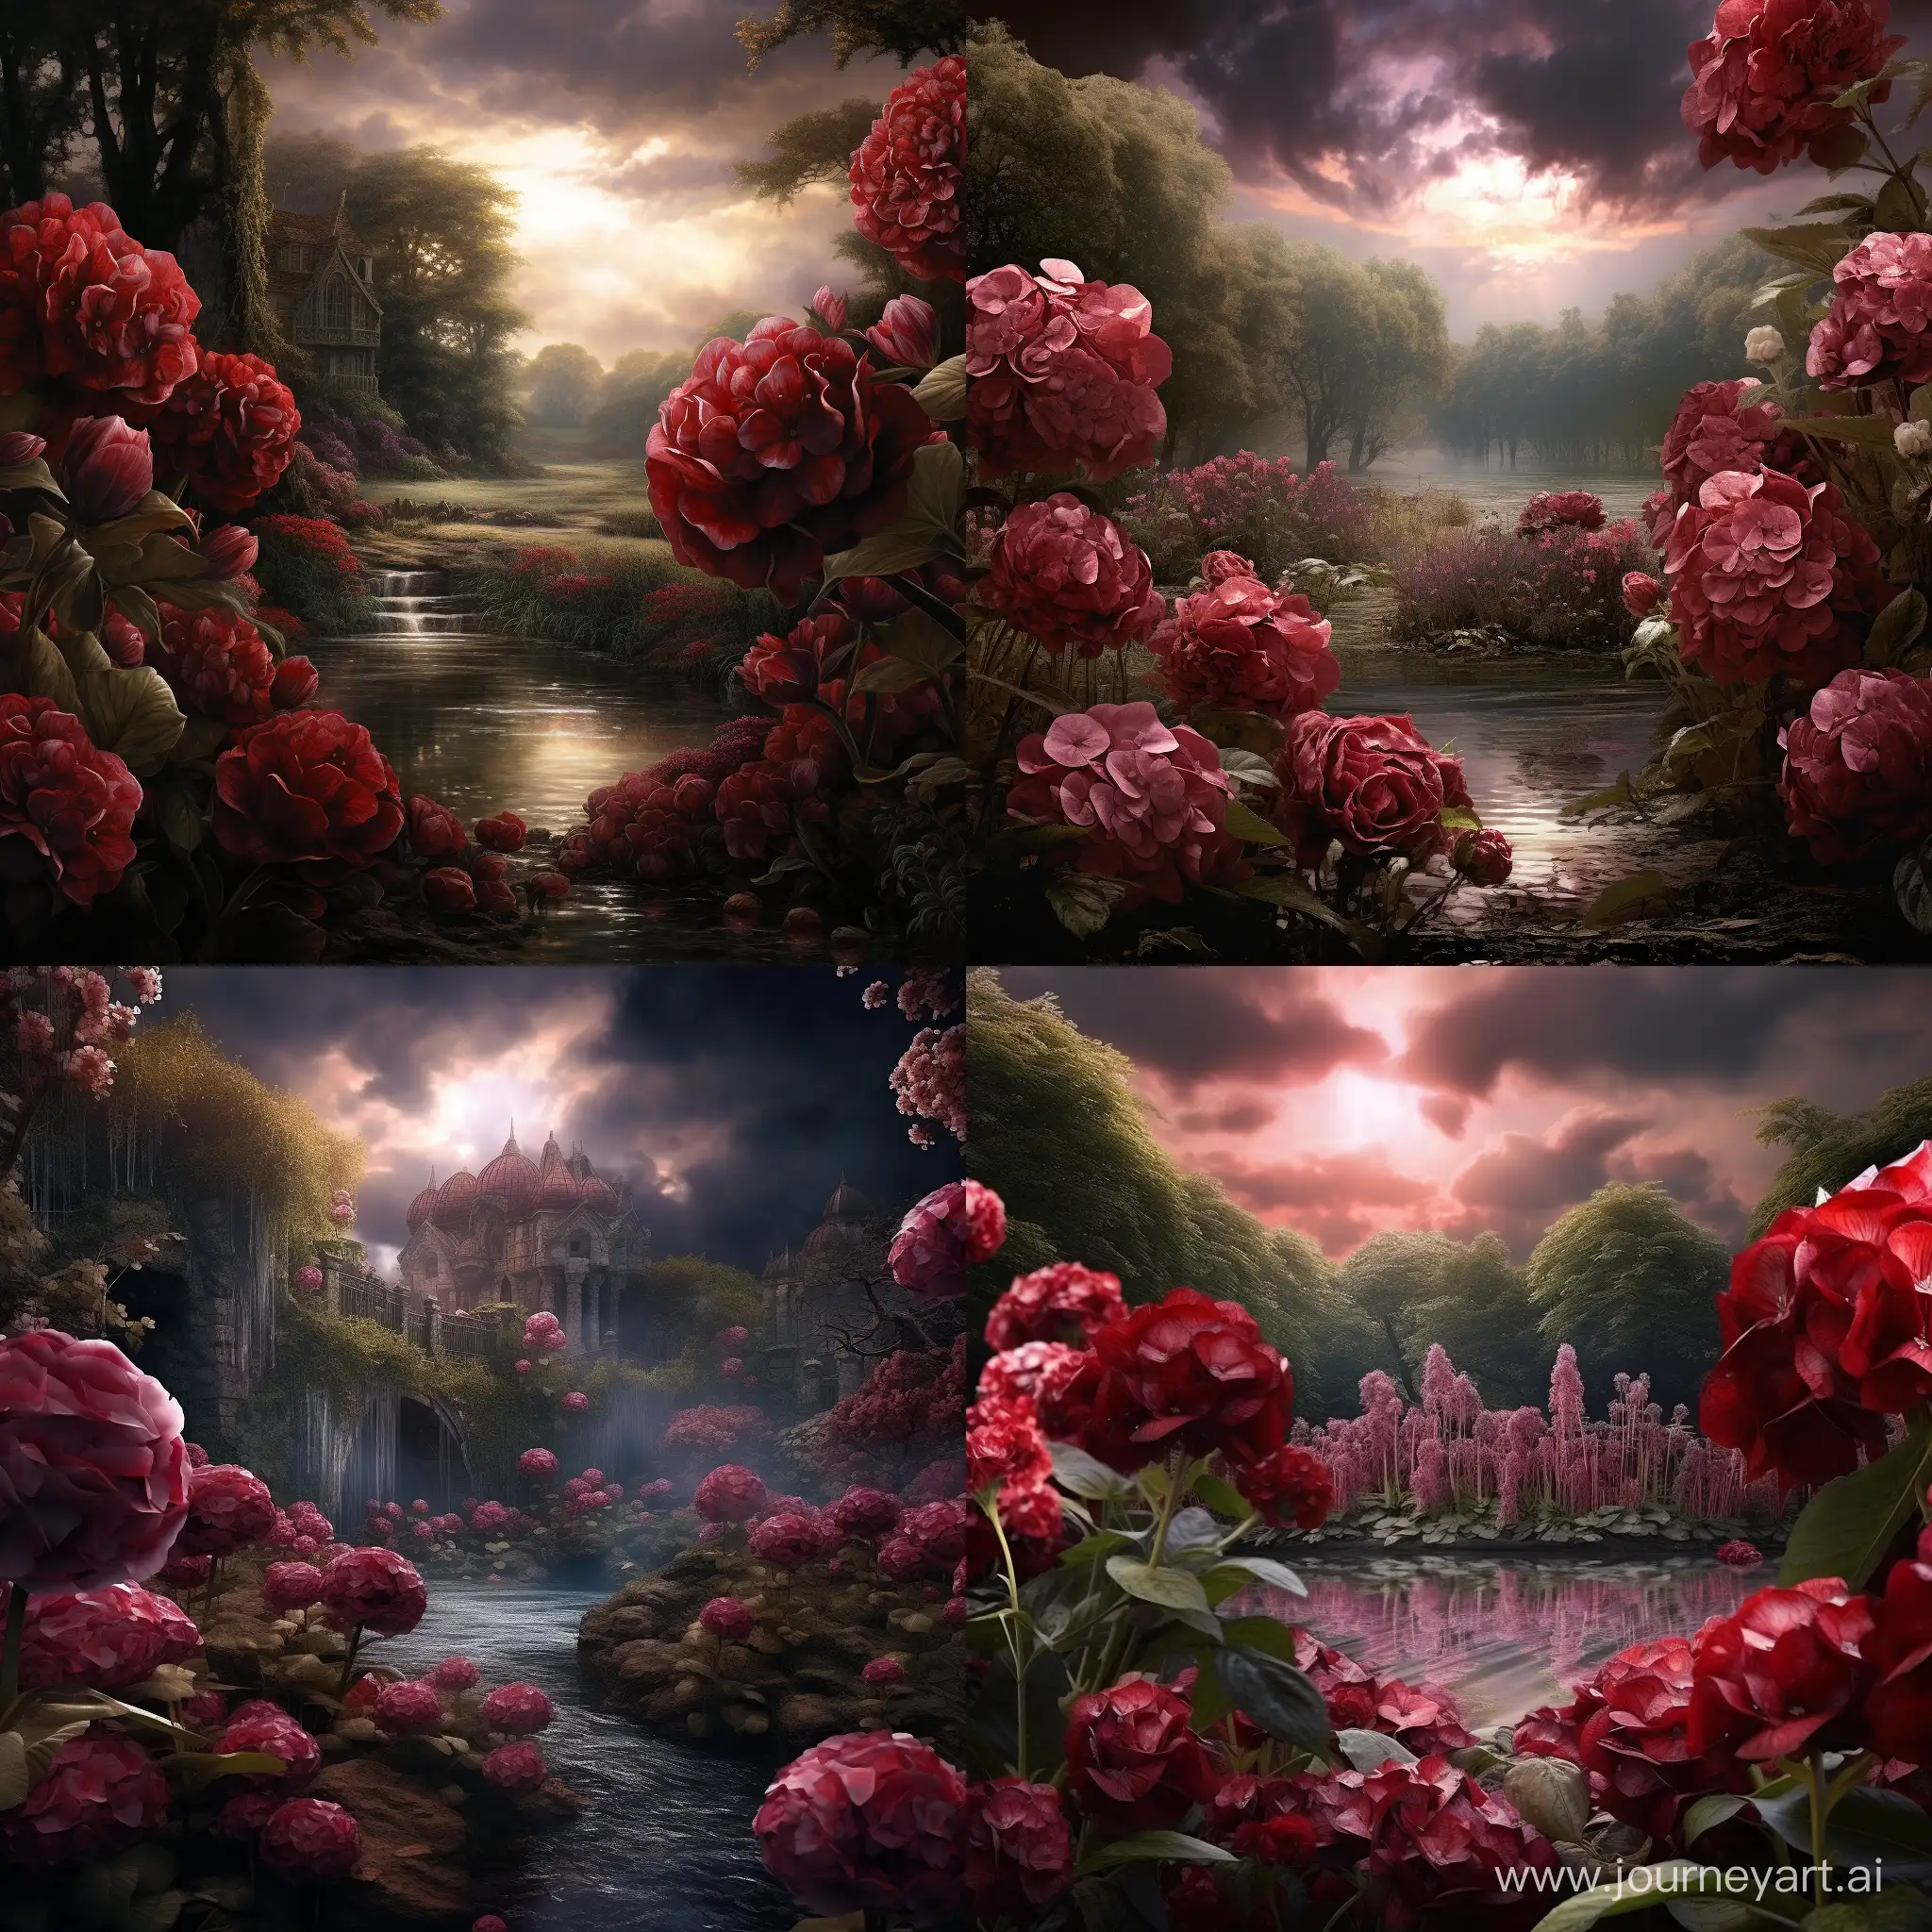 A wonderful garden of dark red hydrangeas by a small pond. It is cloudy, the sun barely makes its way through the clouds and illuminates the garden, there are lotuses in the pond